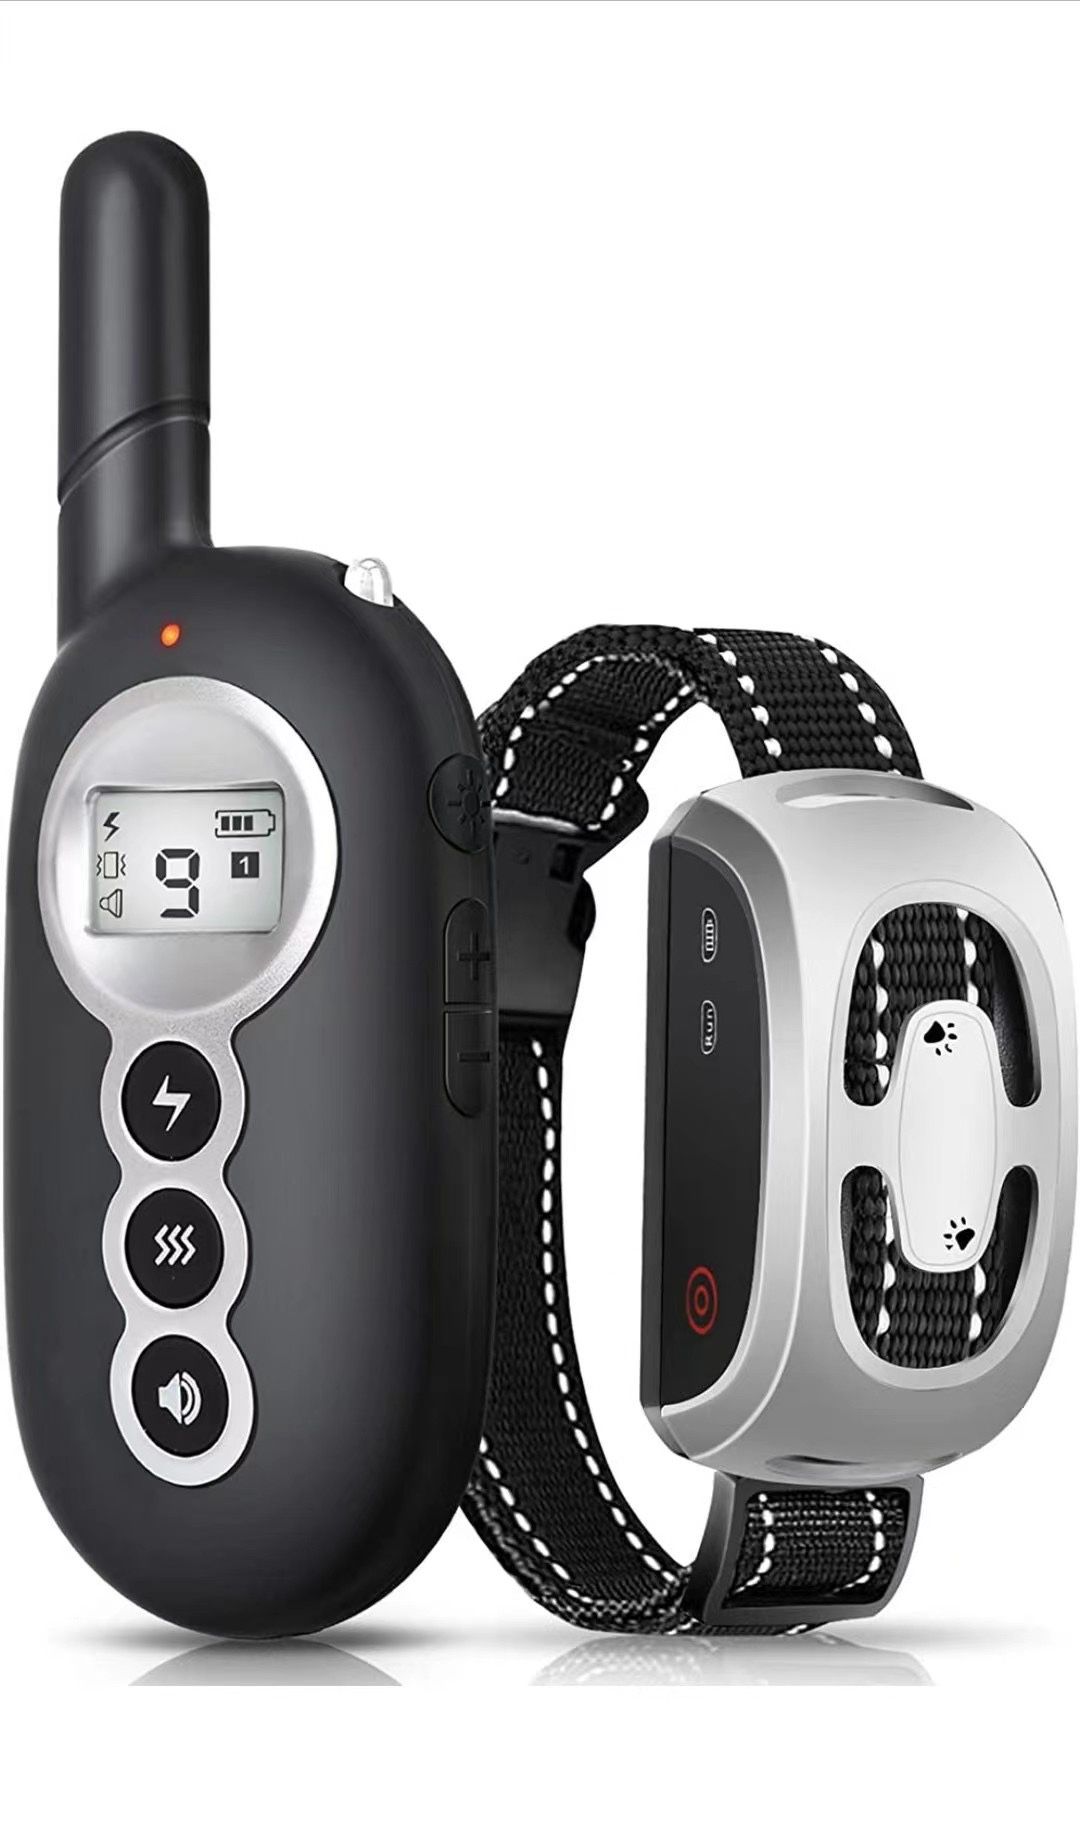 Dog Training Collar, Dog Shock Collar with Remote, Rechargeable Rainproof 1500Ft Remote Range, Shock Collar for Dogs 4 Working Modes, Beep Vibration S